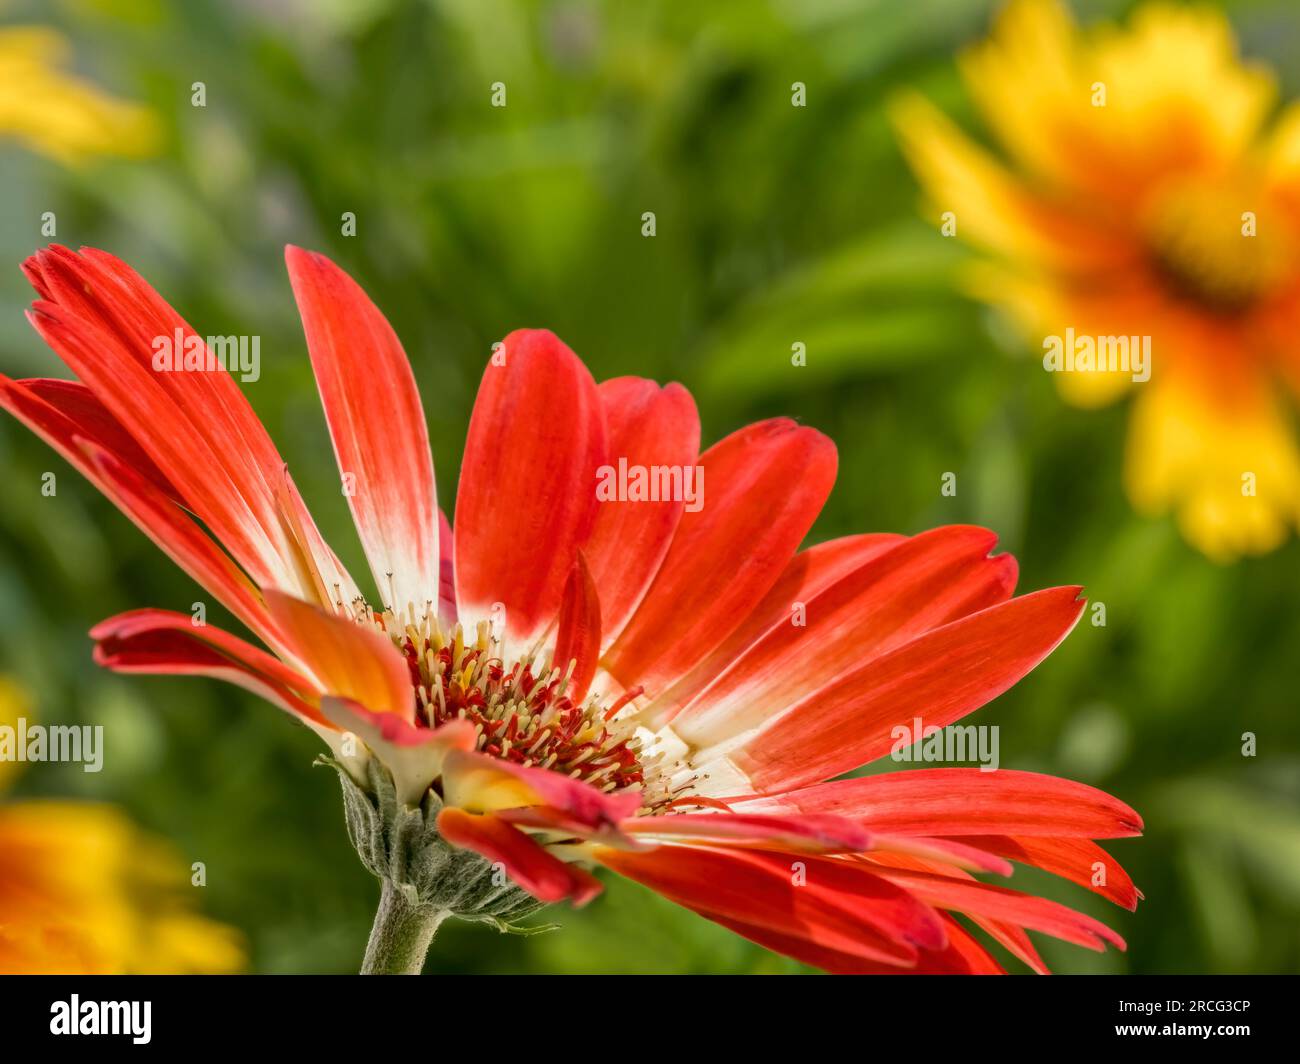 Close up of red Gerbera daisy flowers Stock Photo